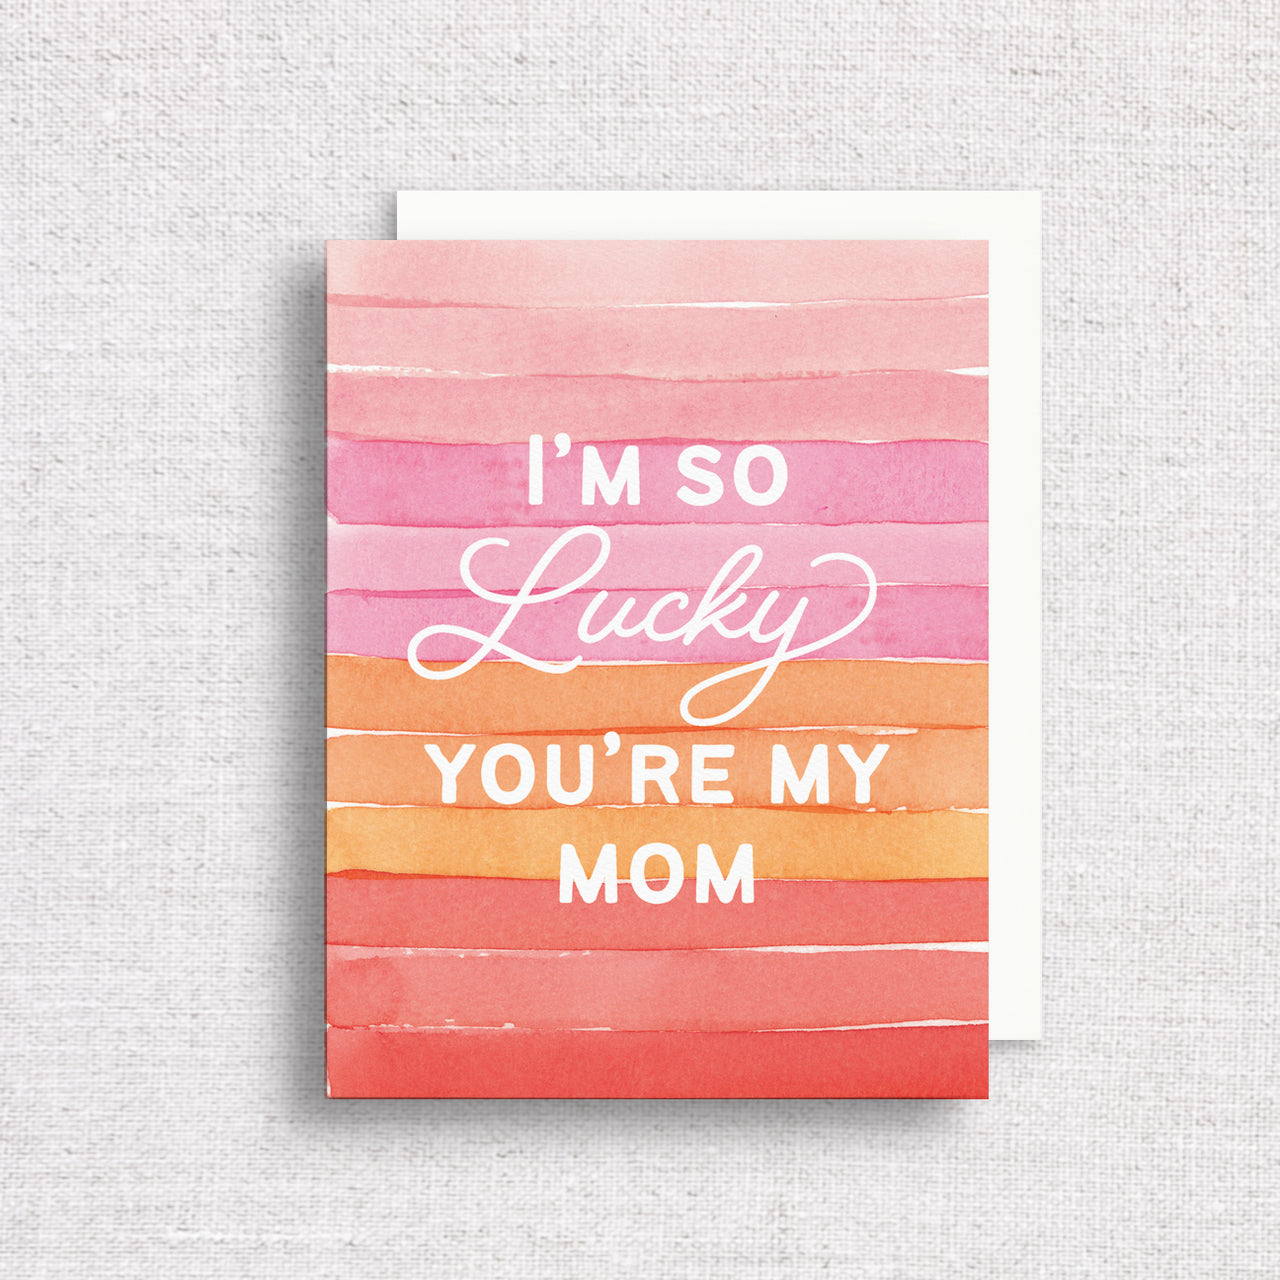 I'm So Lucky You're My Mom Greeting Card by Gert & Co